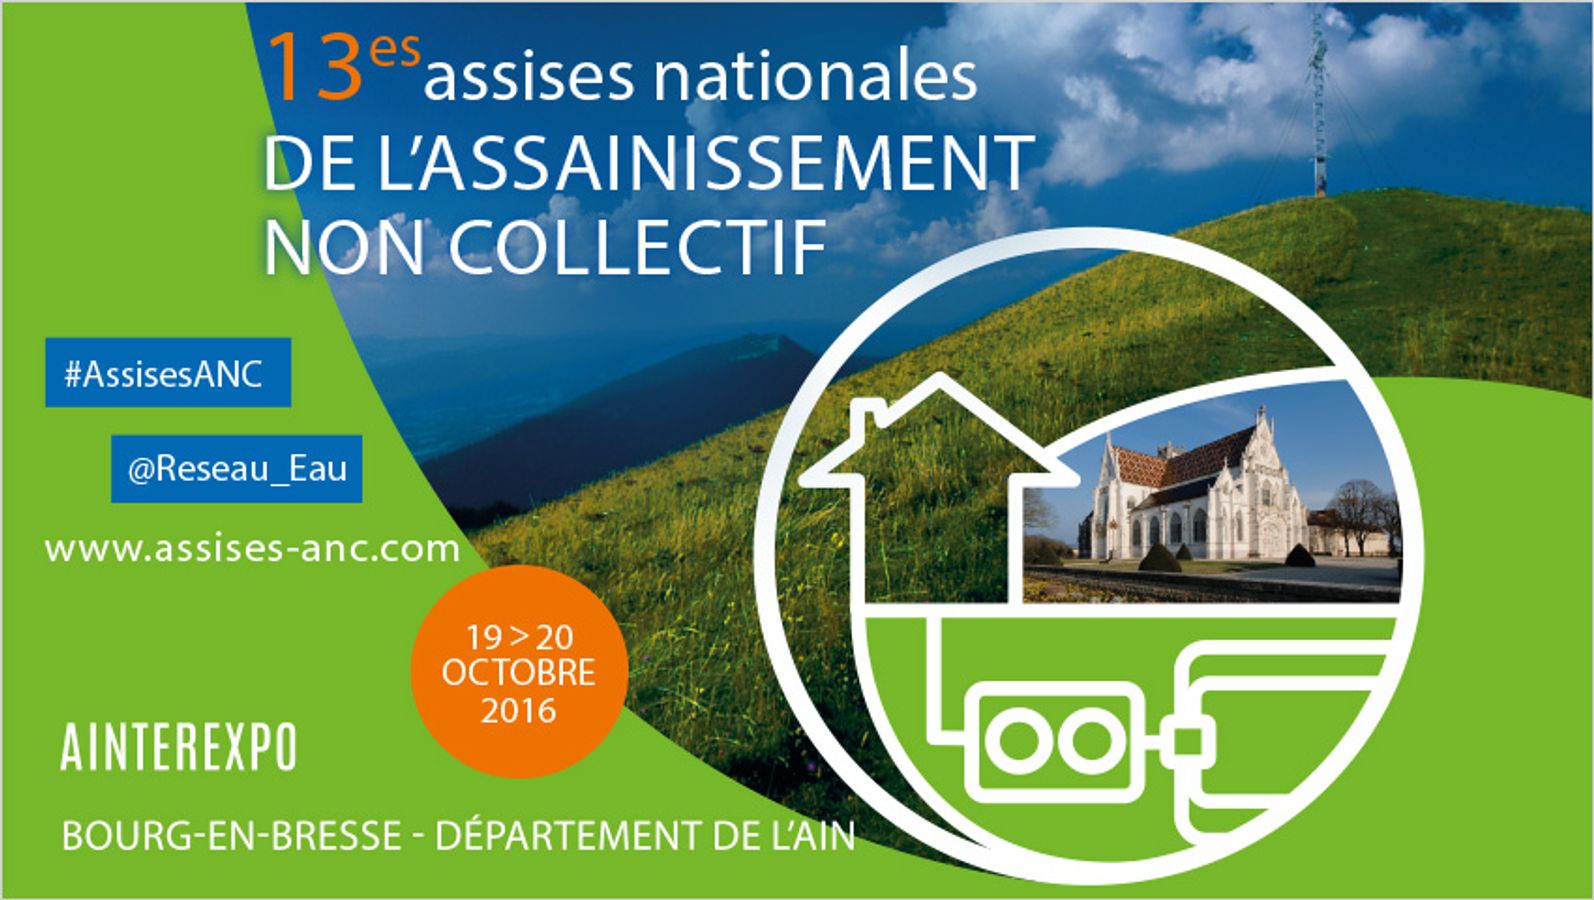 Assises ANC - Supports disponibles - Jour 2